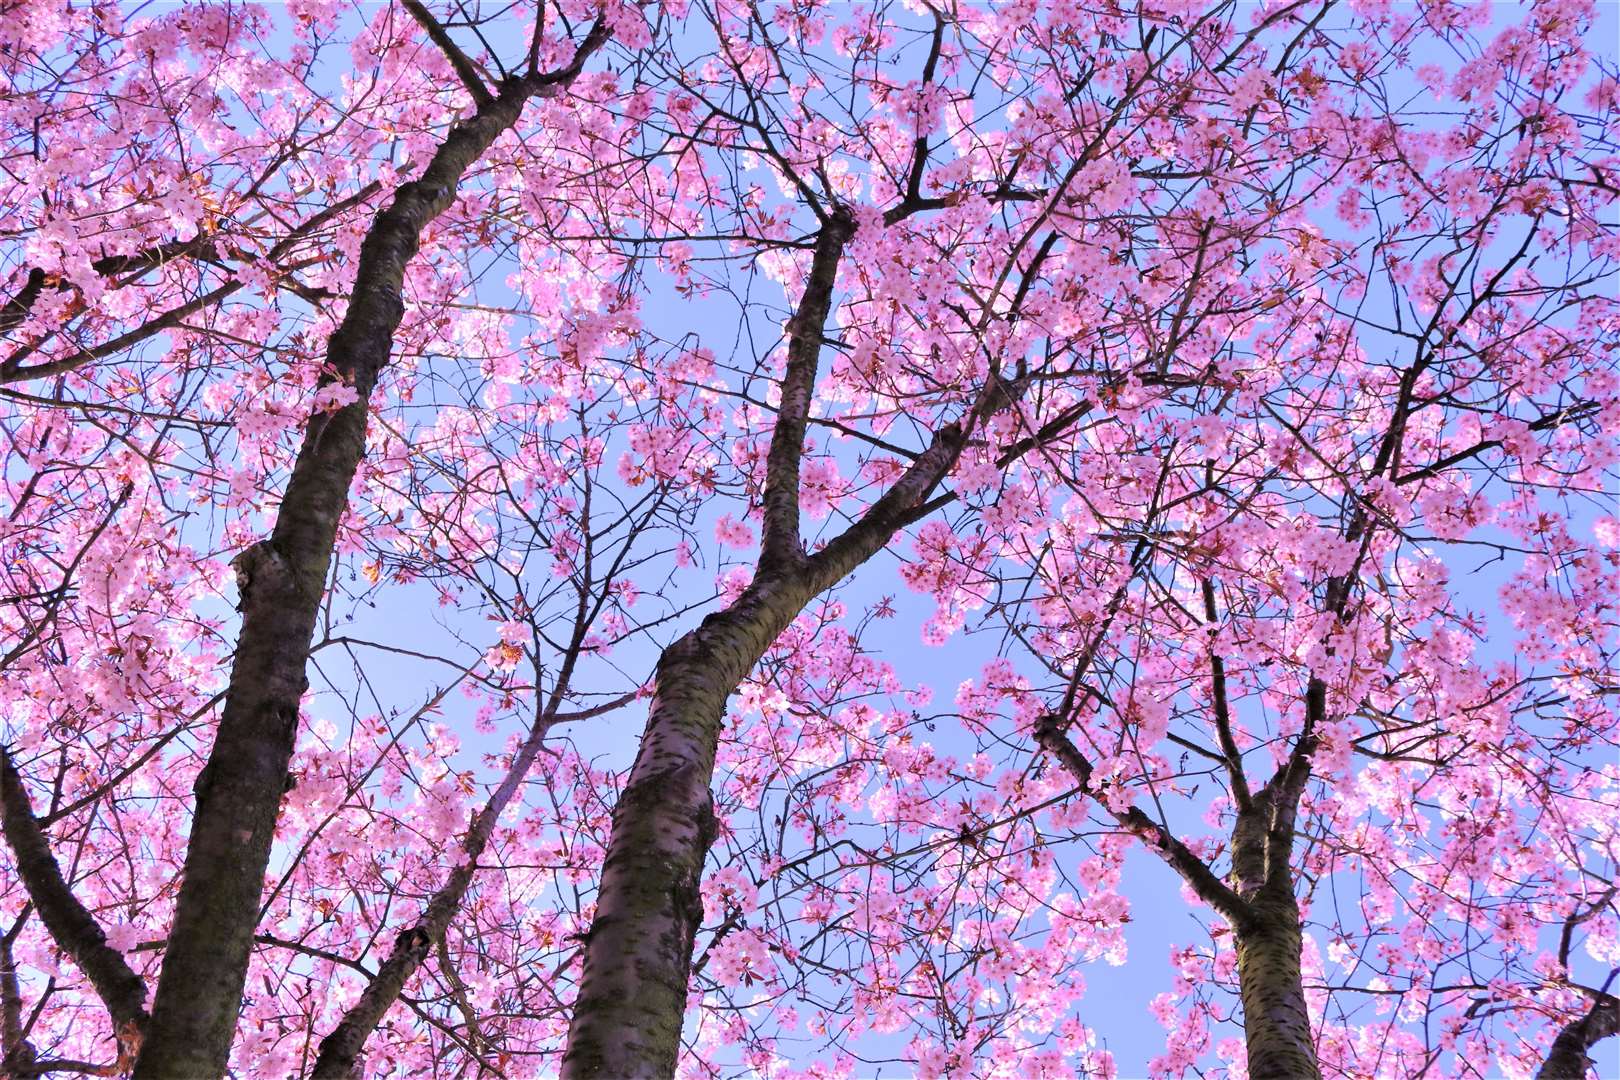 Gardeners are hoping for stunning spring displays of blossom. Image: Stock photo.